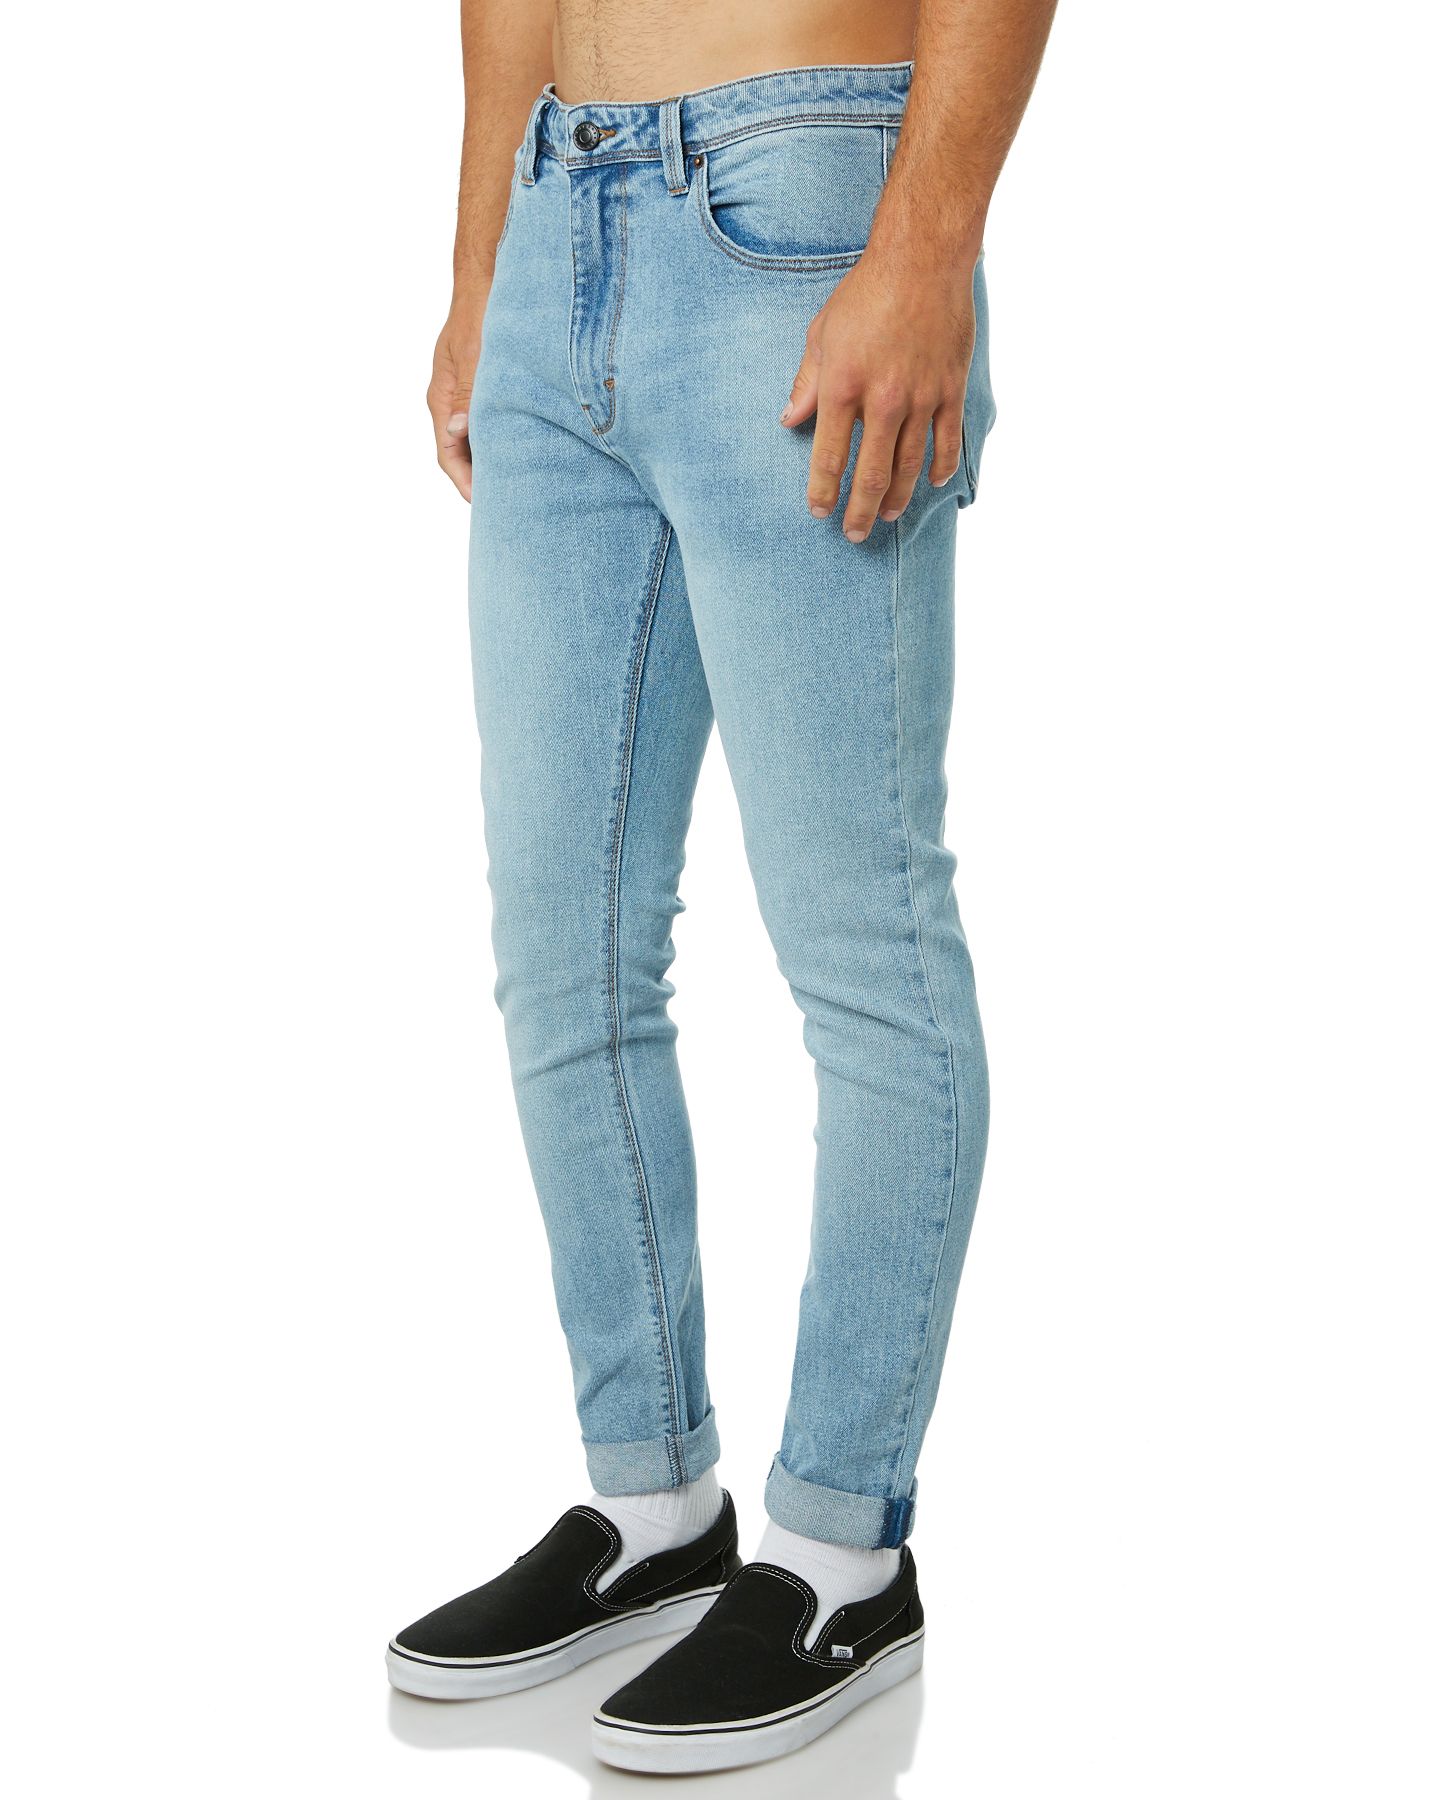 Abrand A Dropped Skinny Turn Up Mens Jean - Yell Blue | SurfStitch